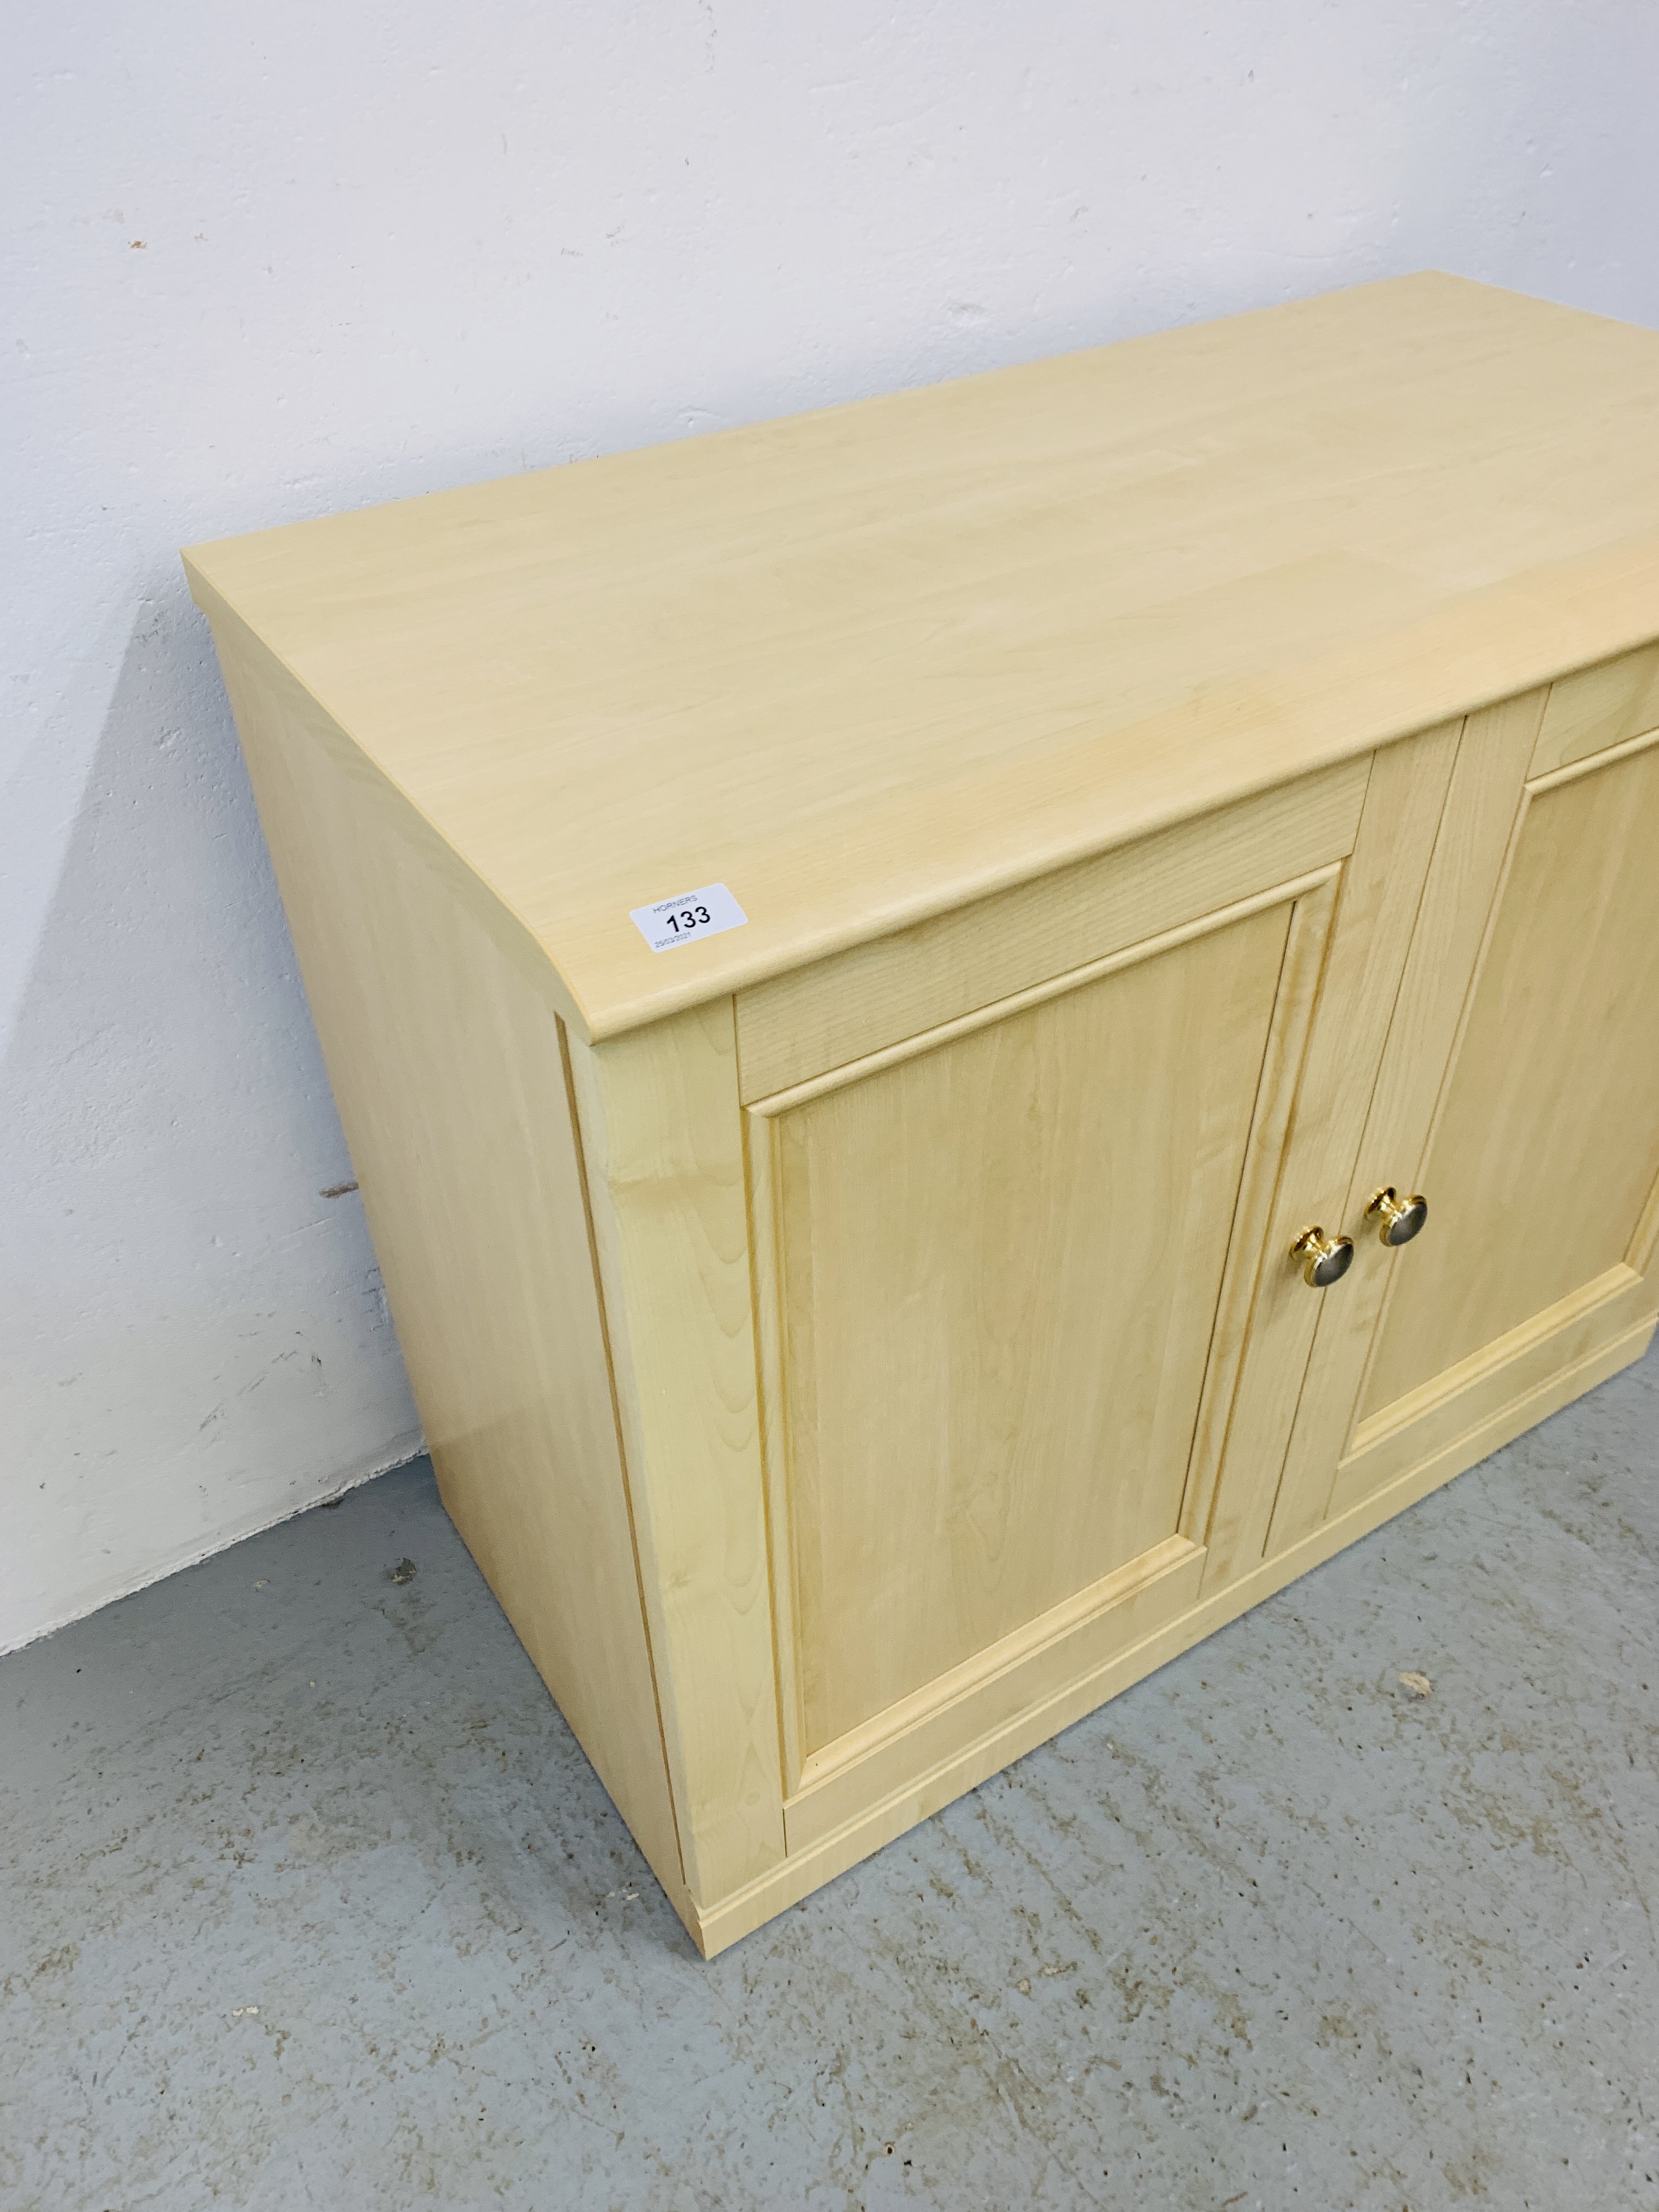 A LIGHT ASH FINISH TWO DOOR SHELVED STORAGE CABINET. WIDTH 90cm, HEIGHT 76cm, DEPTH 45cm. - Image 5 of 6